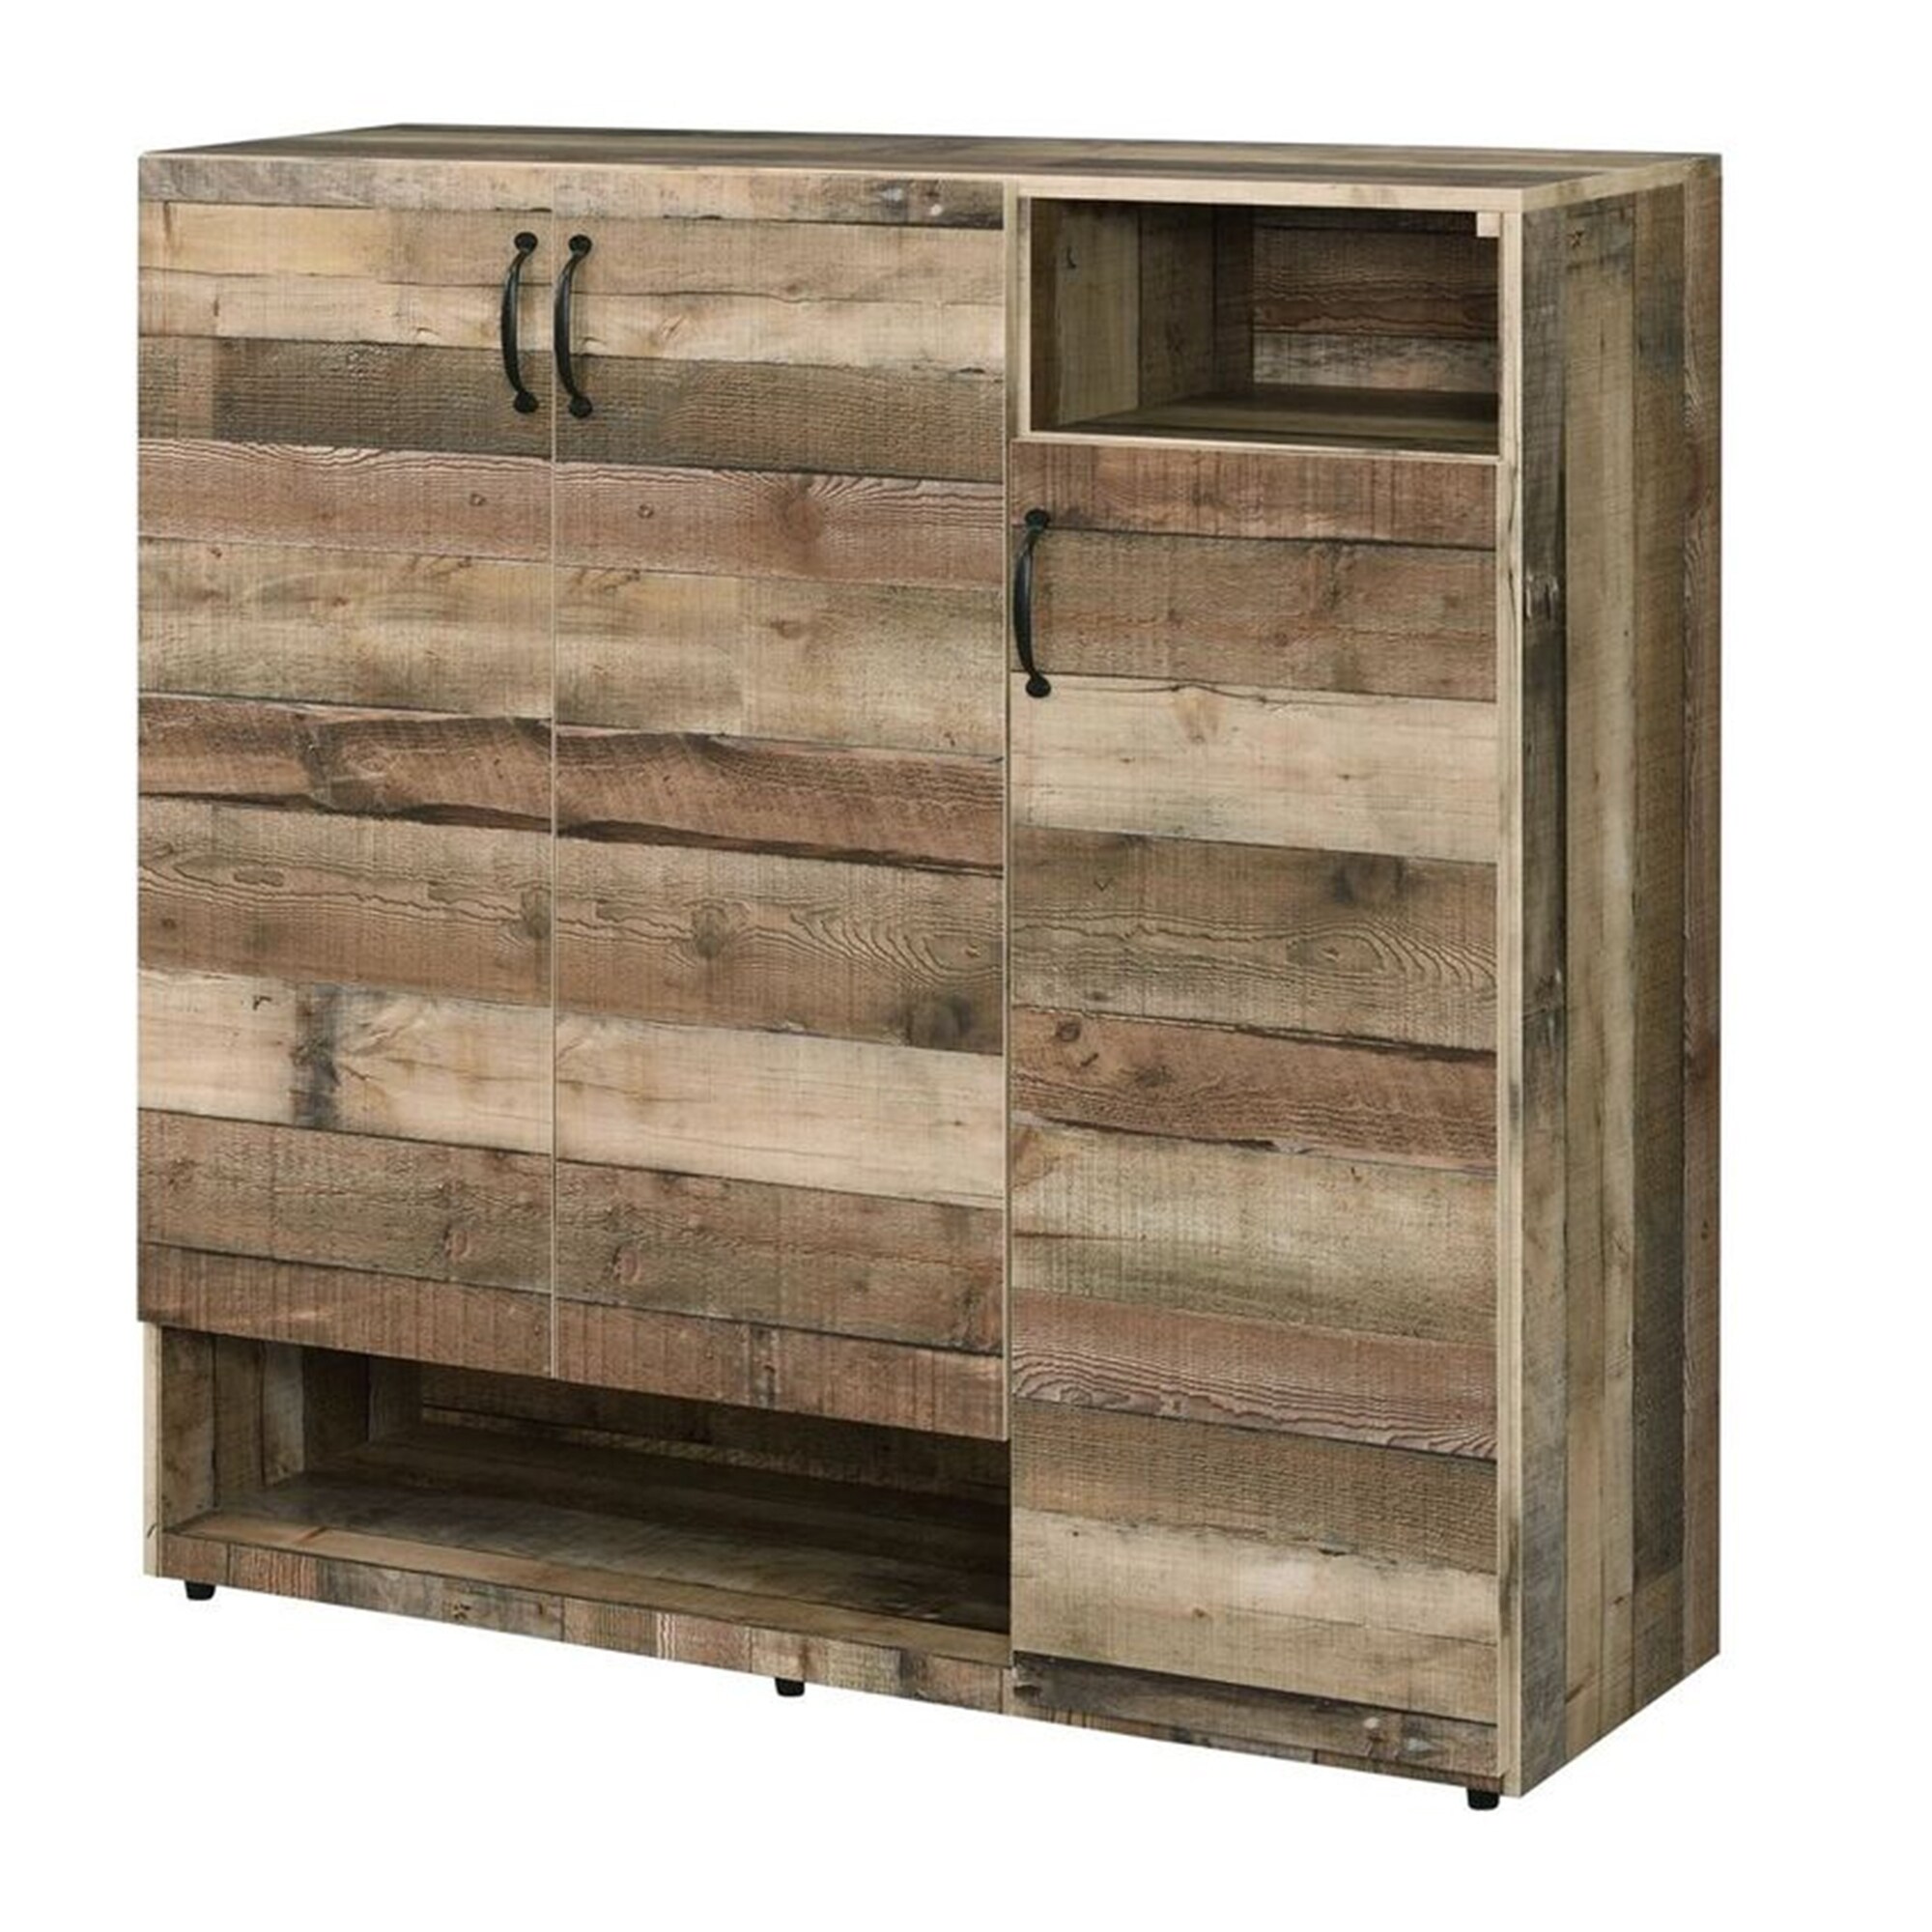 Shop Black Friday Deals On 3 Door Wooden Shoe Cabinet With Multiple Storage Compartments Brown Overstock 30968385